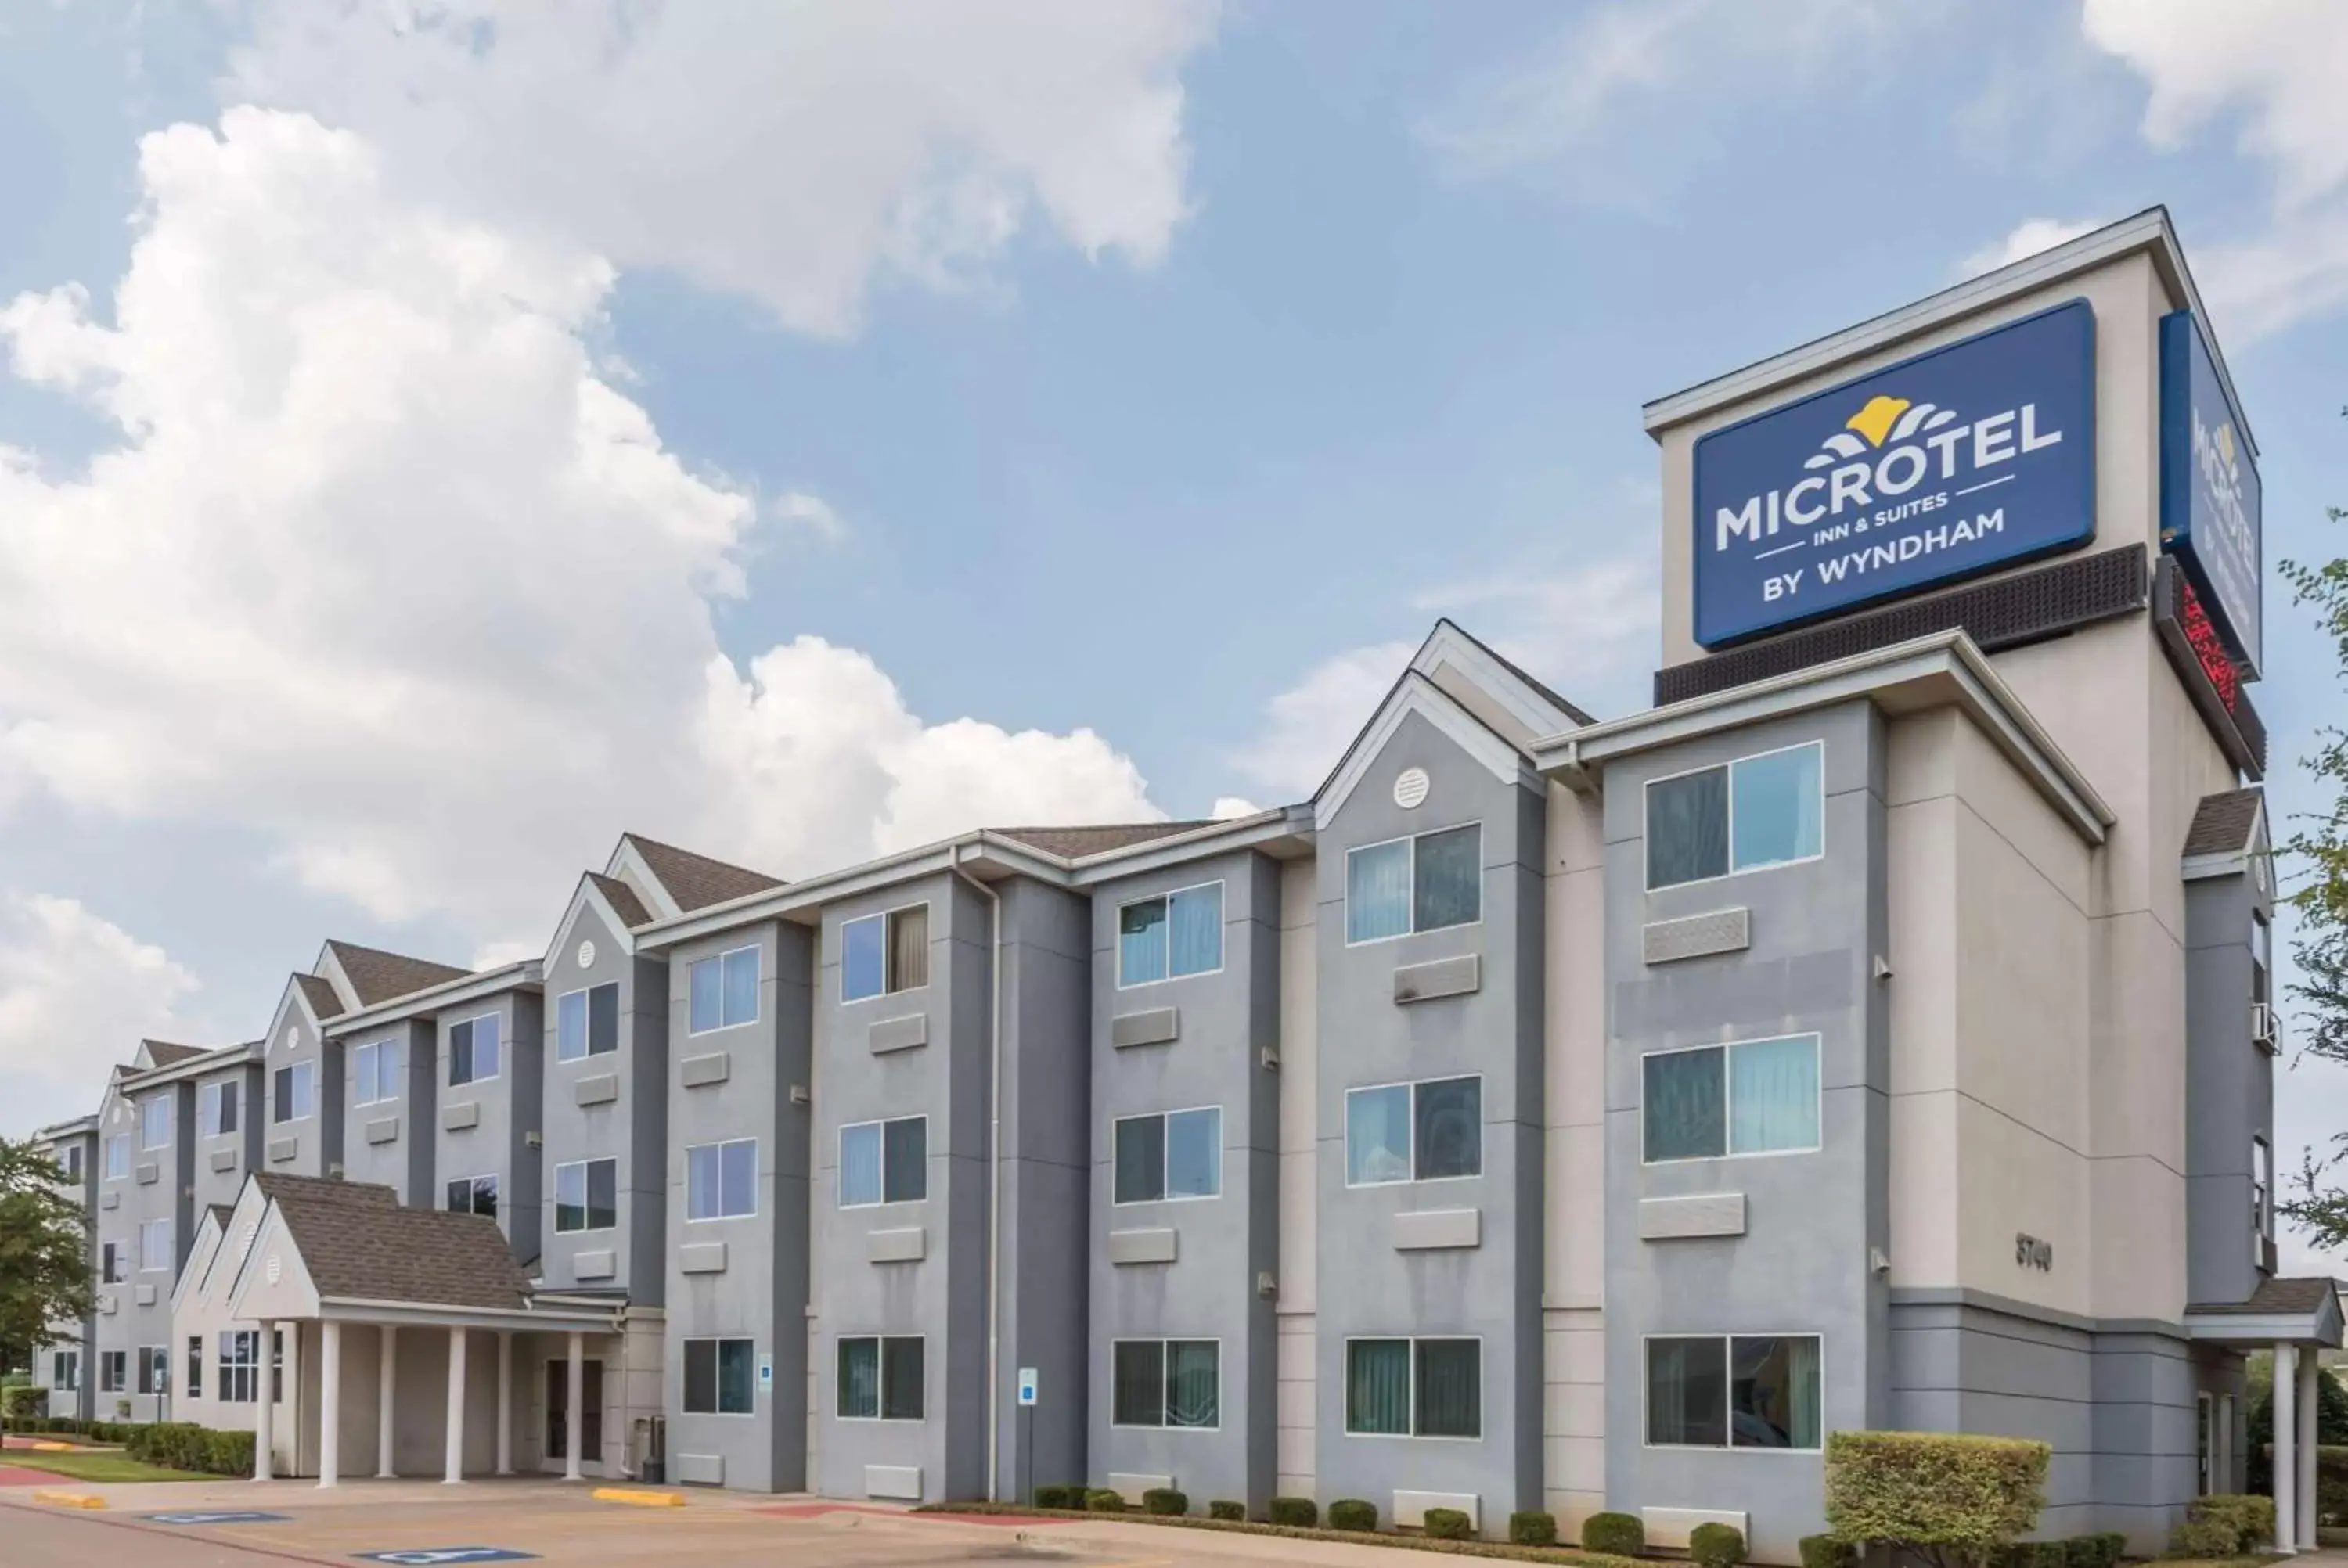 Property building in Microtel Inn & Suites by Wyndham Ft. Worth North/At Fossil